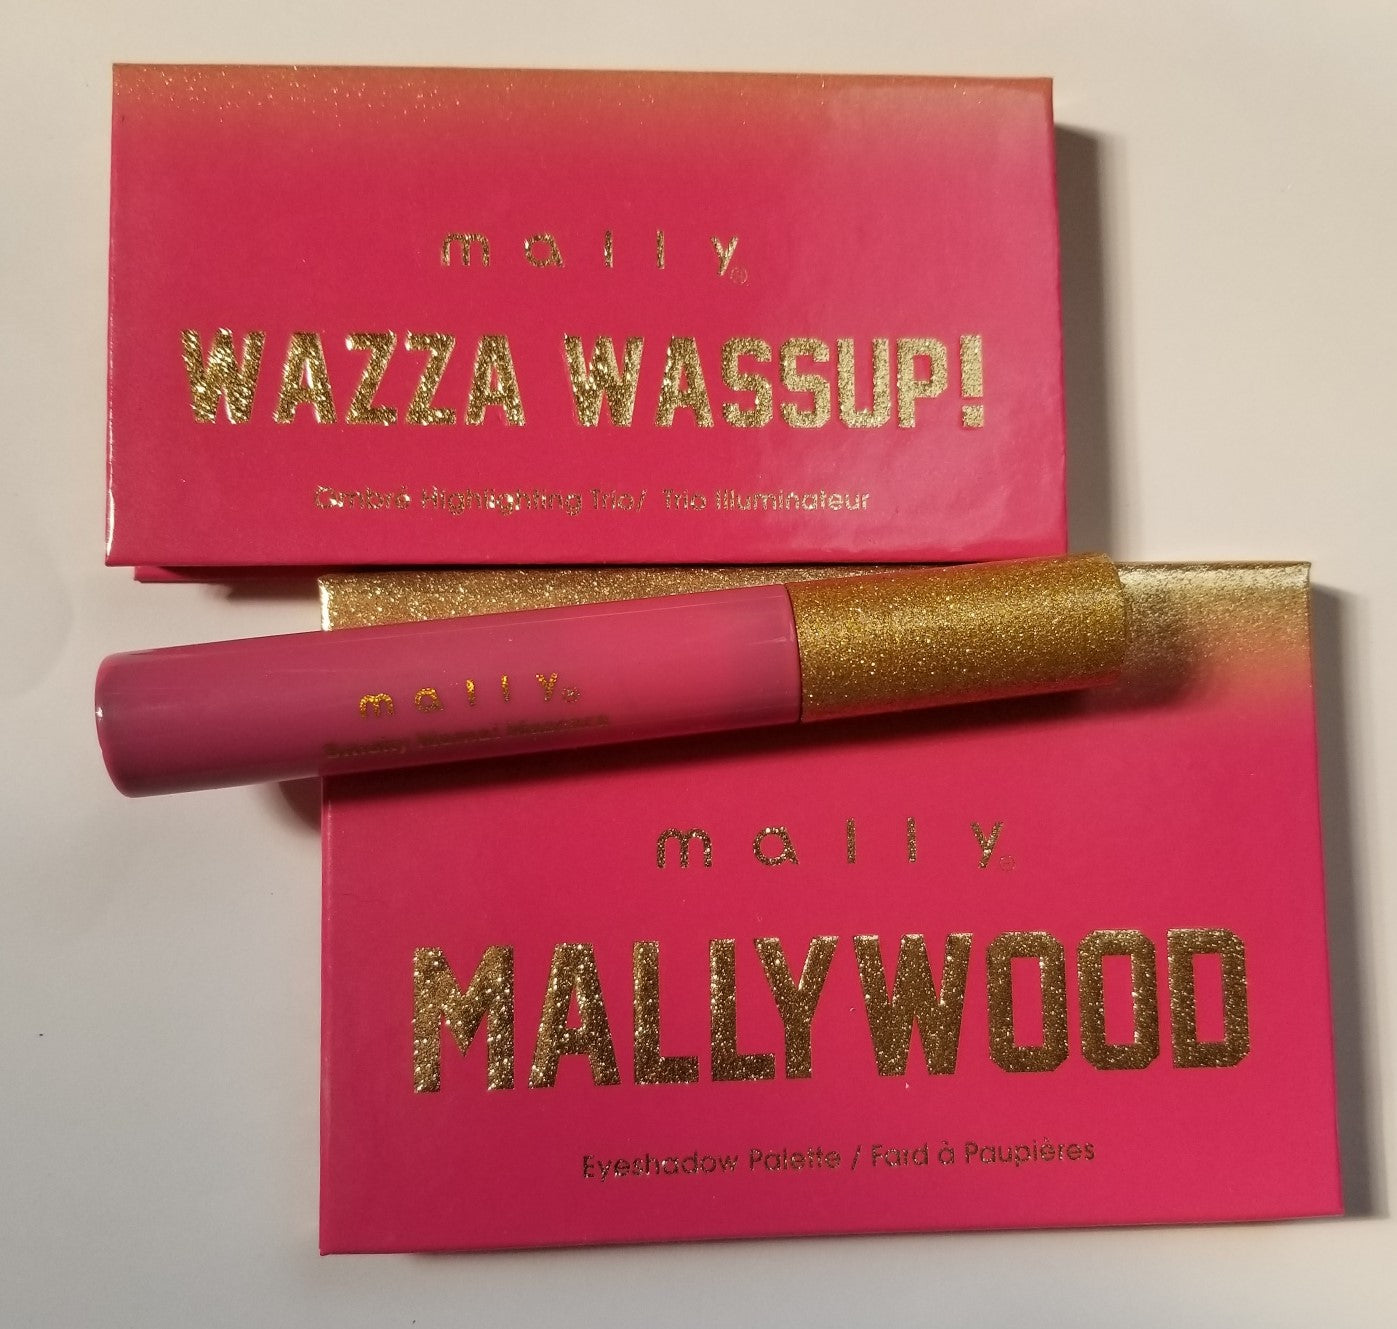 Review, Swatches, Photos, Makeup Trends 2018, 2019, 2020: Mally Beauty, Limited Edition, Mallywood Eyeshadow Palette, Smoky Mama Mascara, Wazza Wazzup Ombre Highlighting Trio